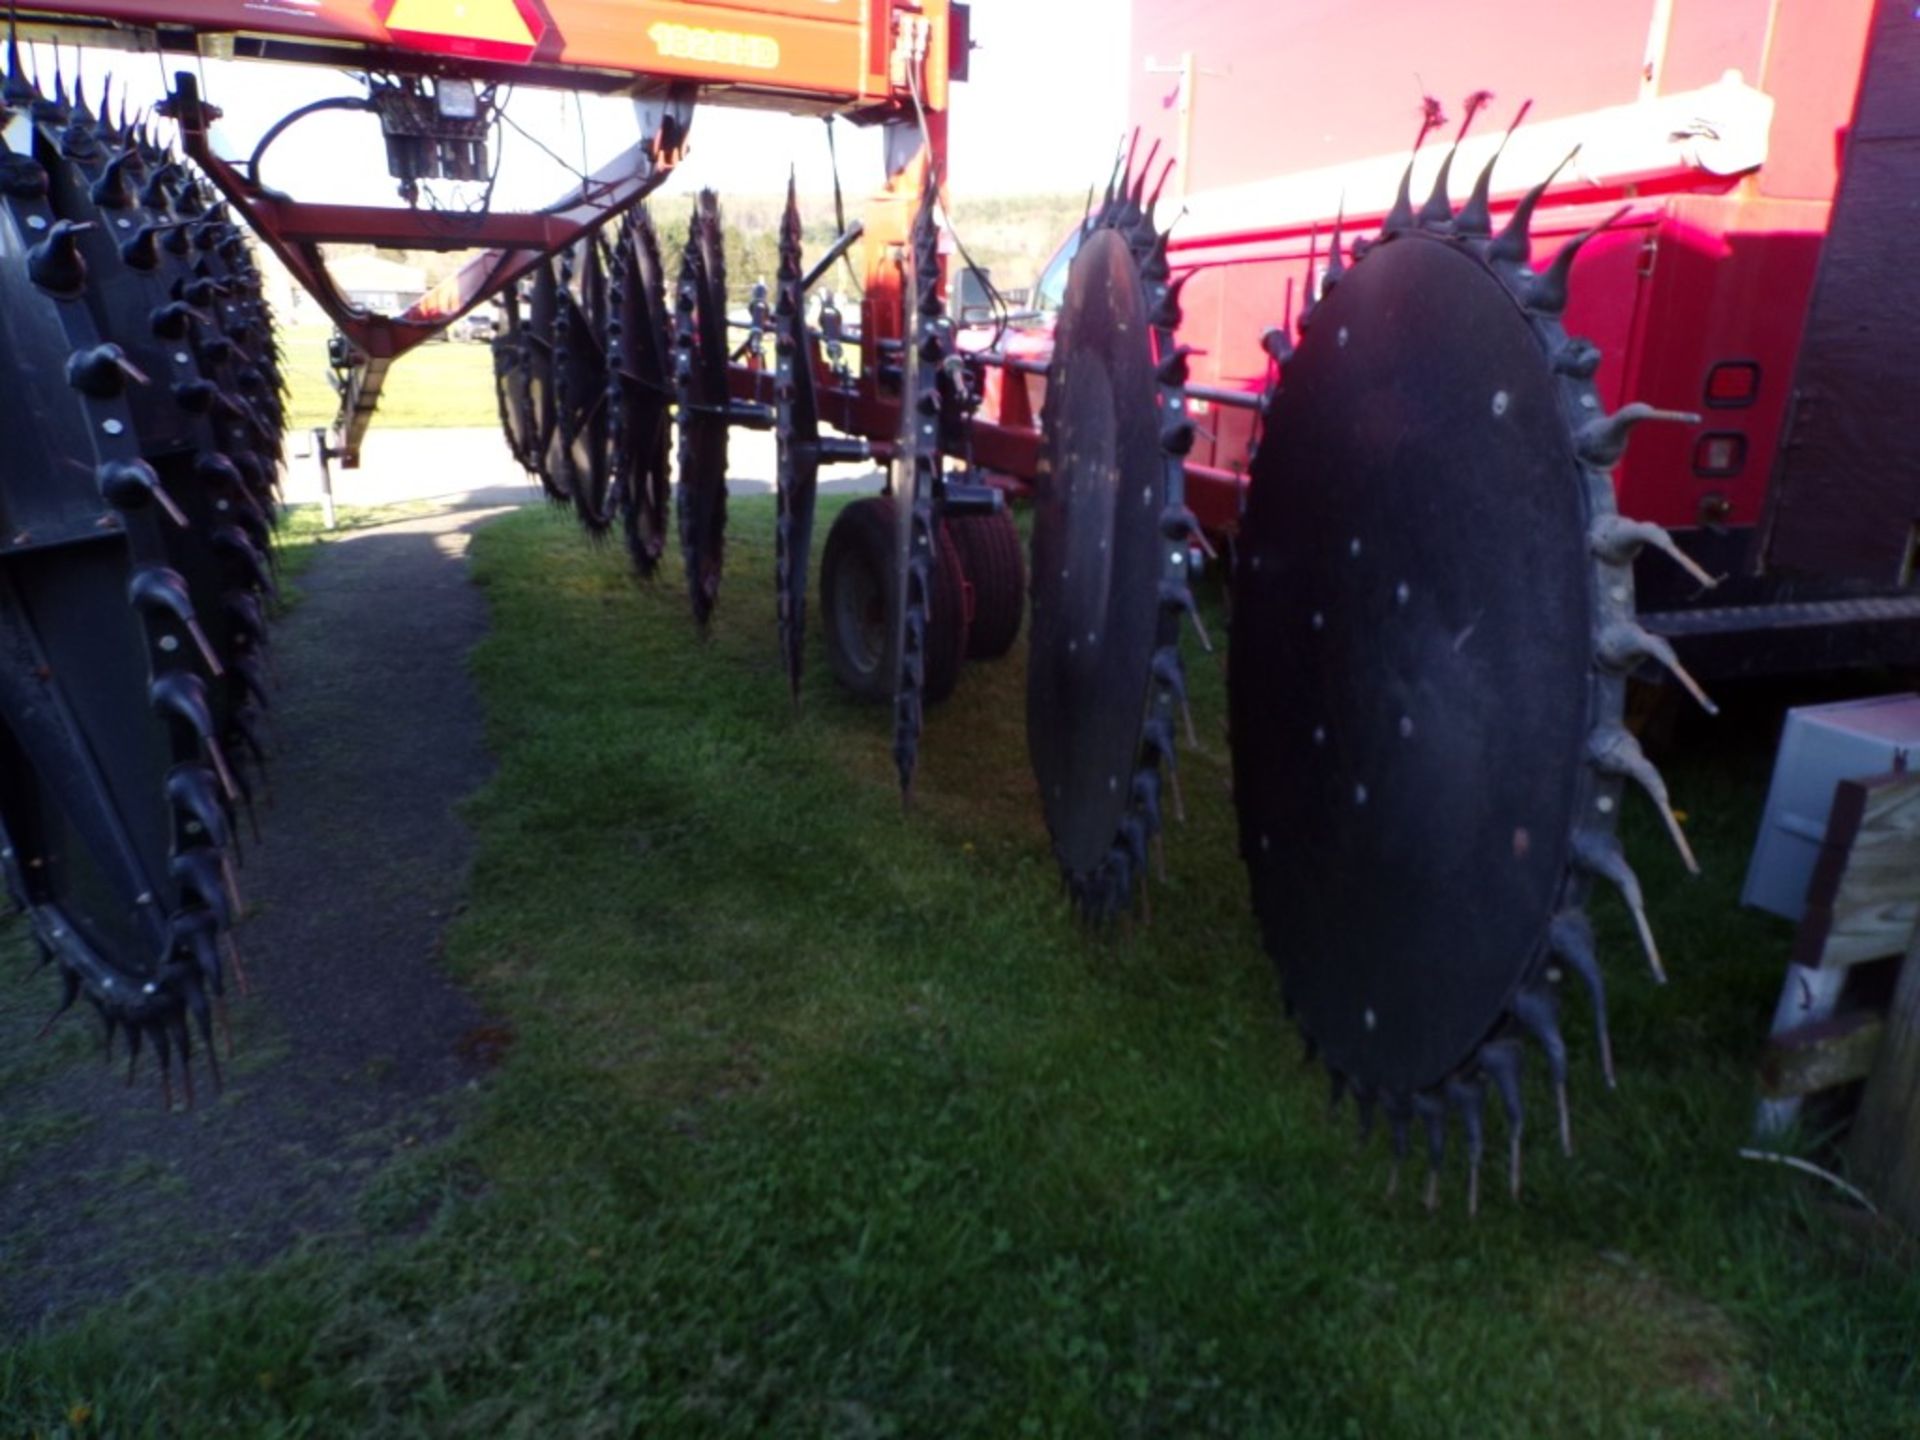 Pequea Windro Pro 1820HD Hyd. Folding Wheel Rake, 17-Wheel -Excellent Condition, Like New (6648) - Image 4 of 4